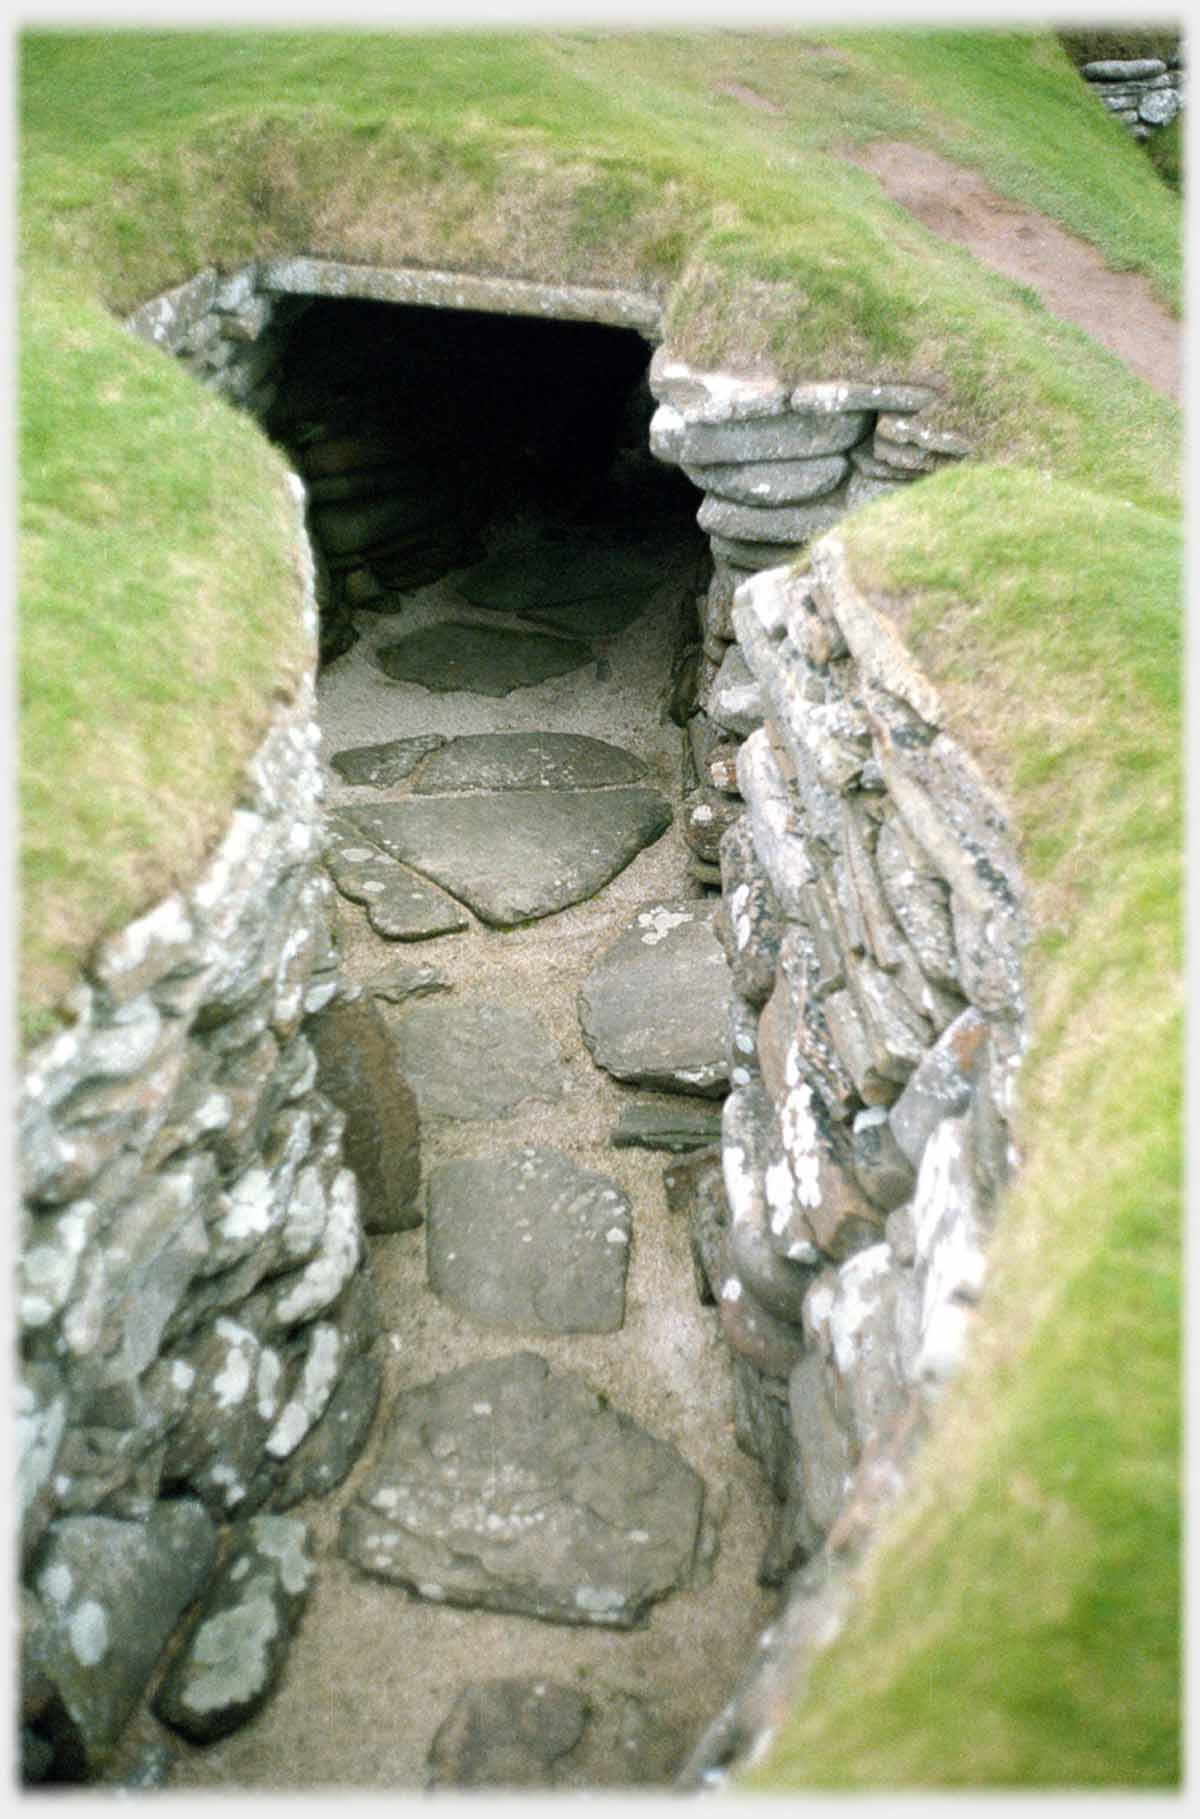 Apparent entrance to tunnel.